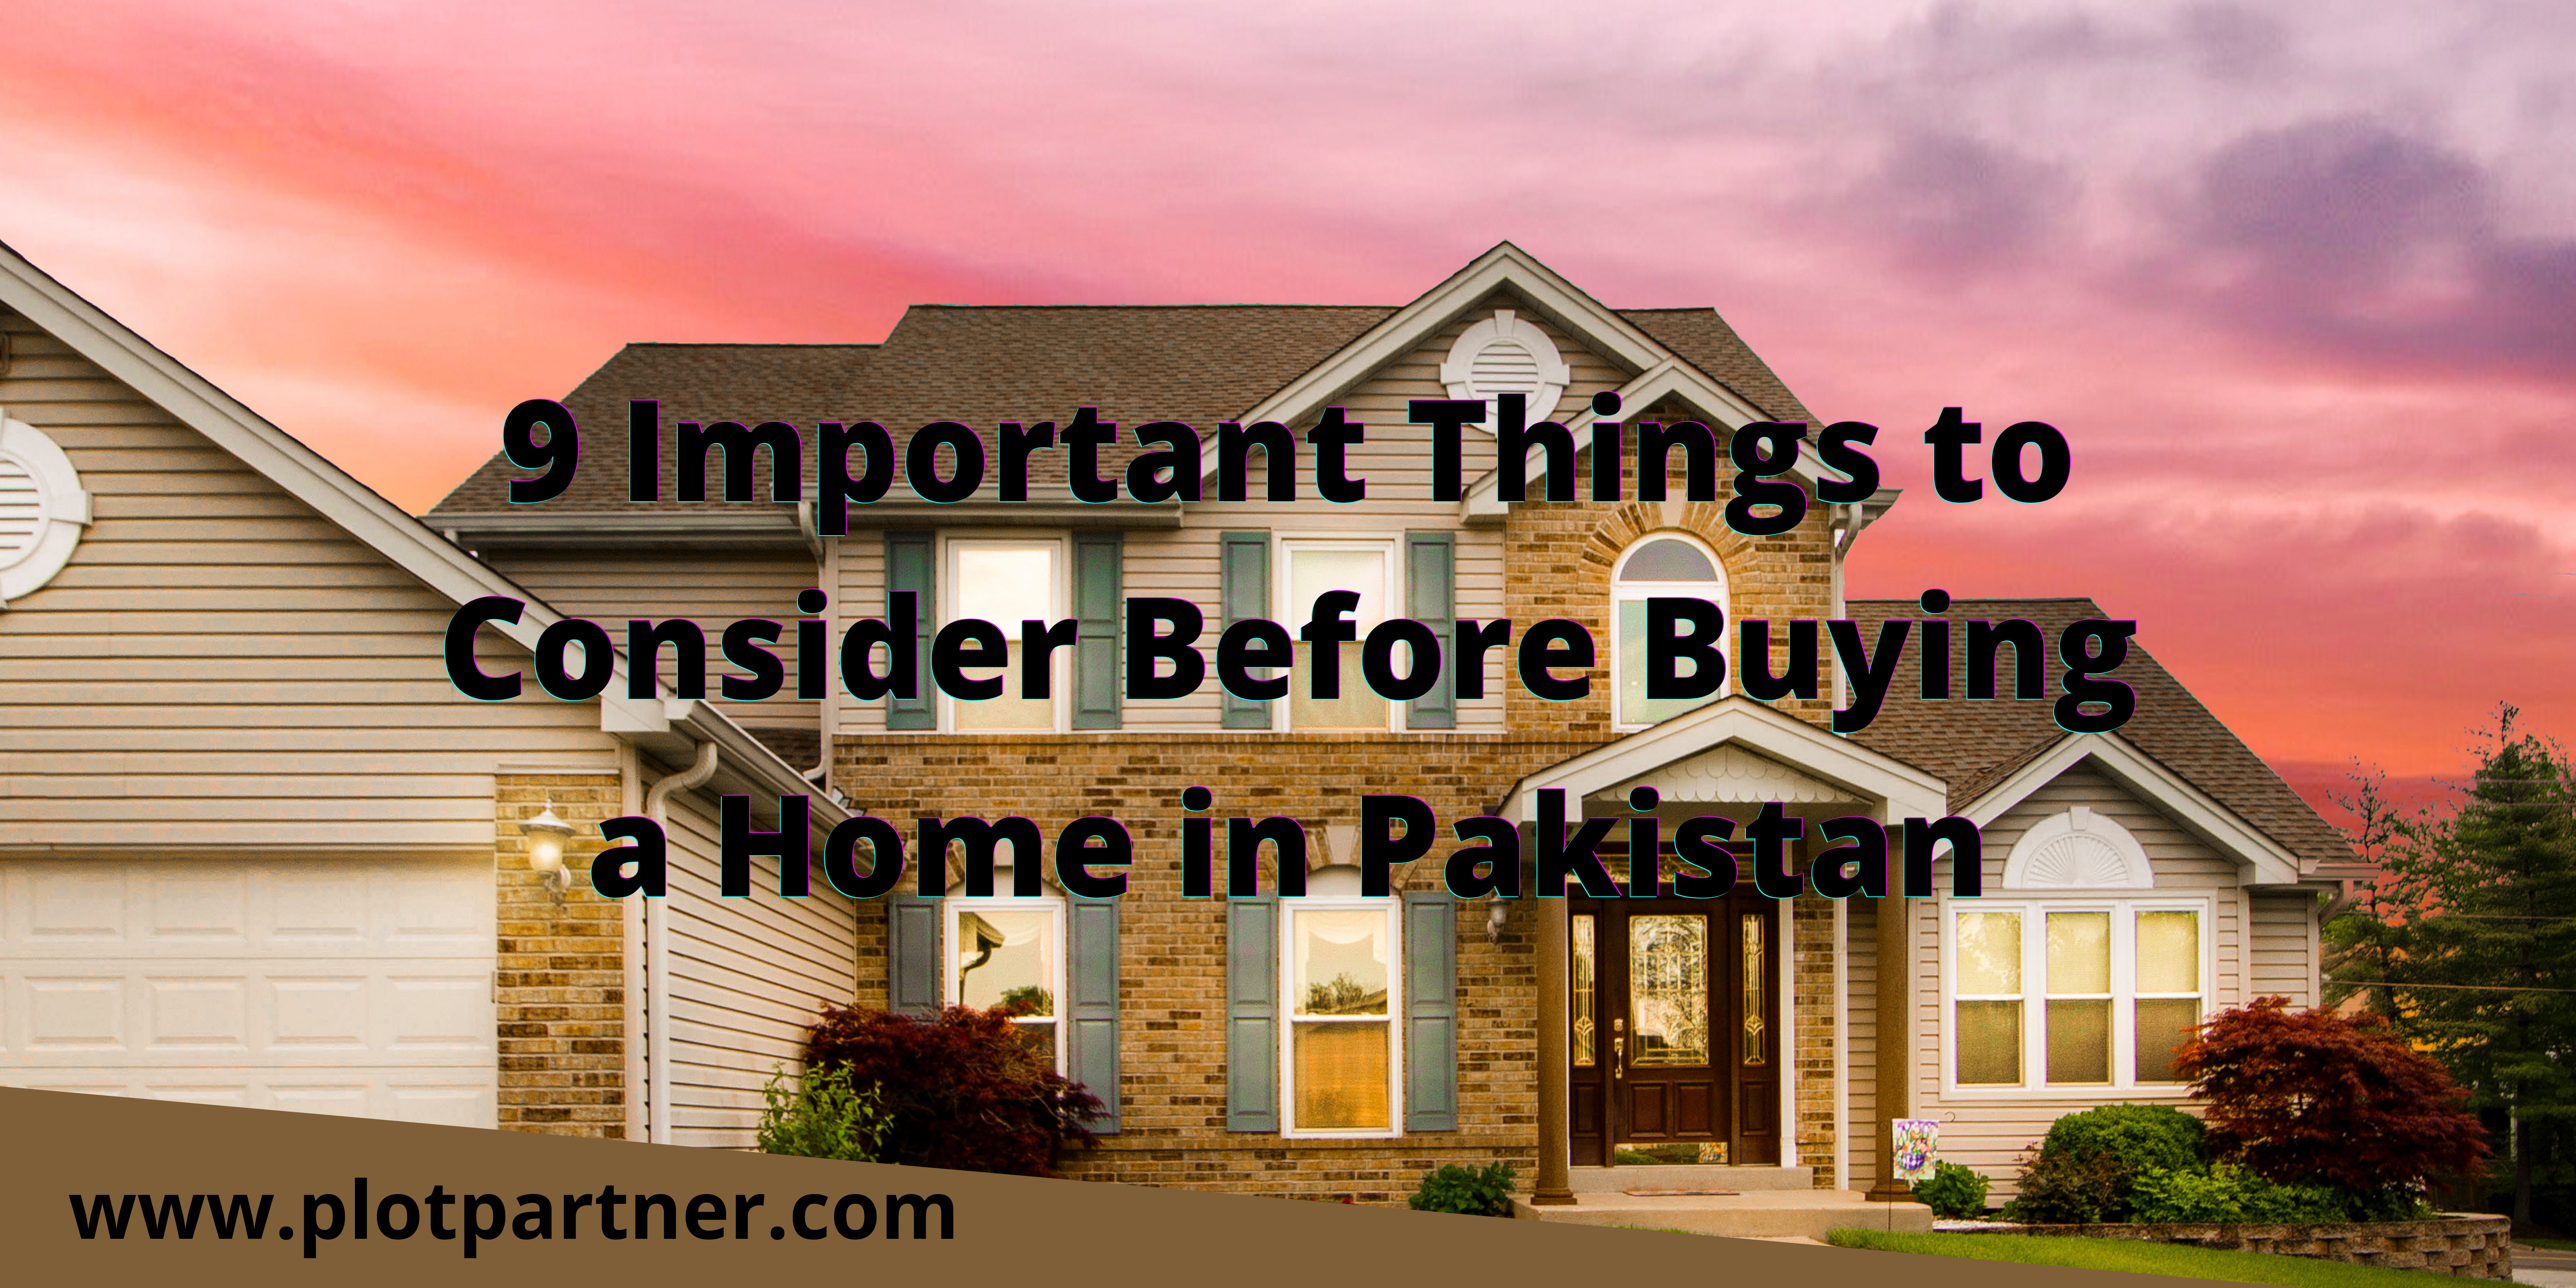 9 Important Things to Consider Before Buying a Home in Pakistan